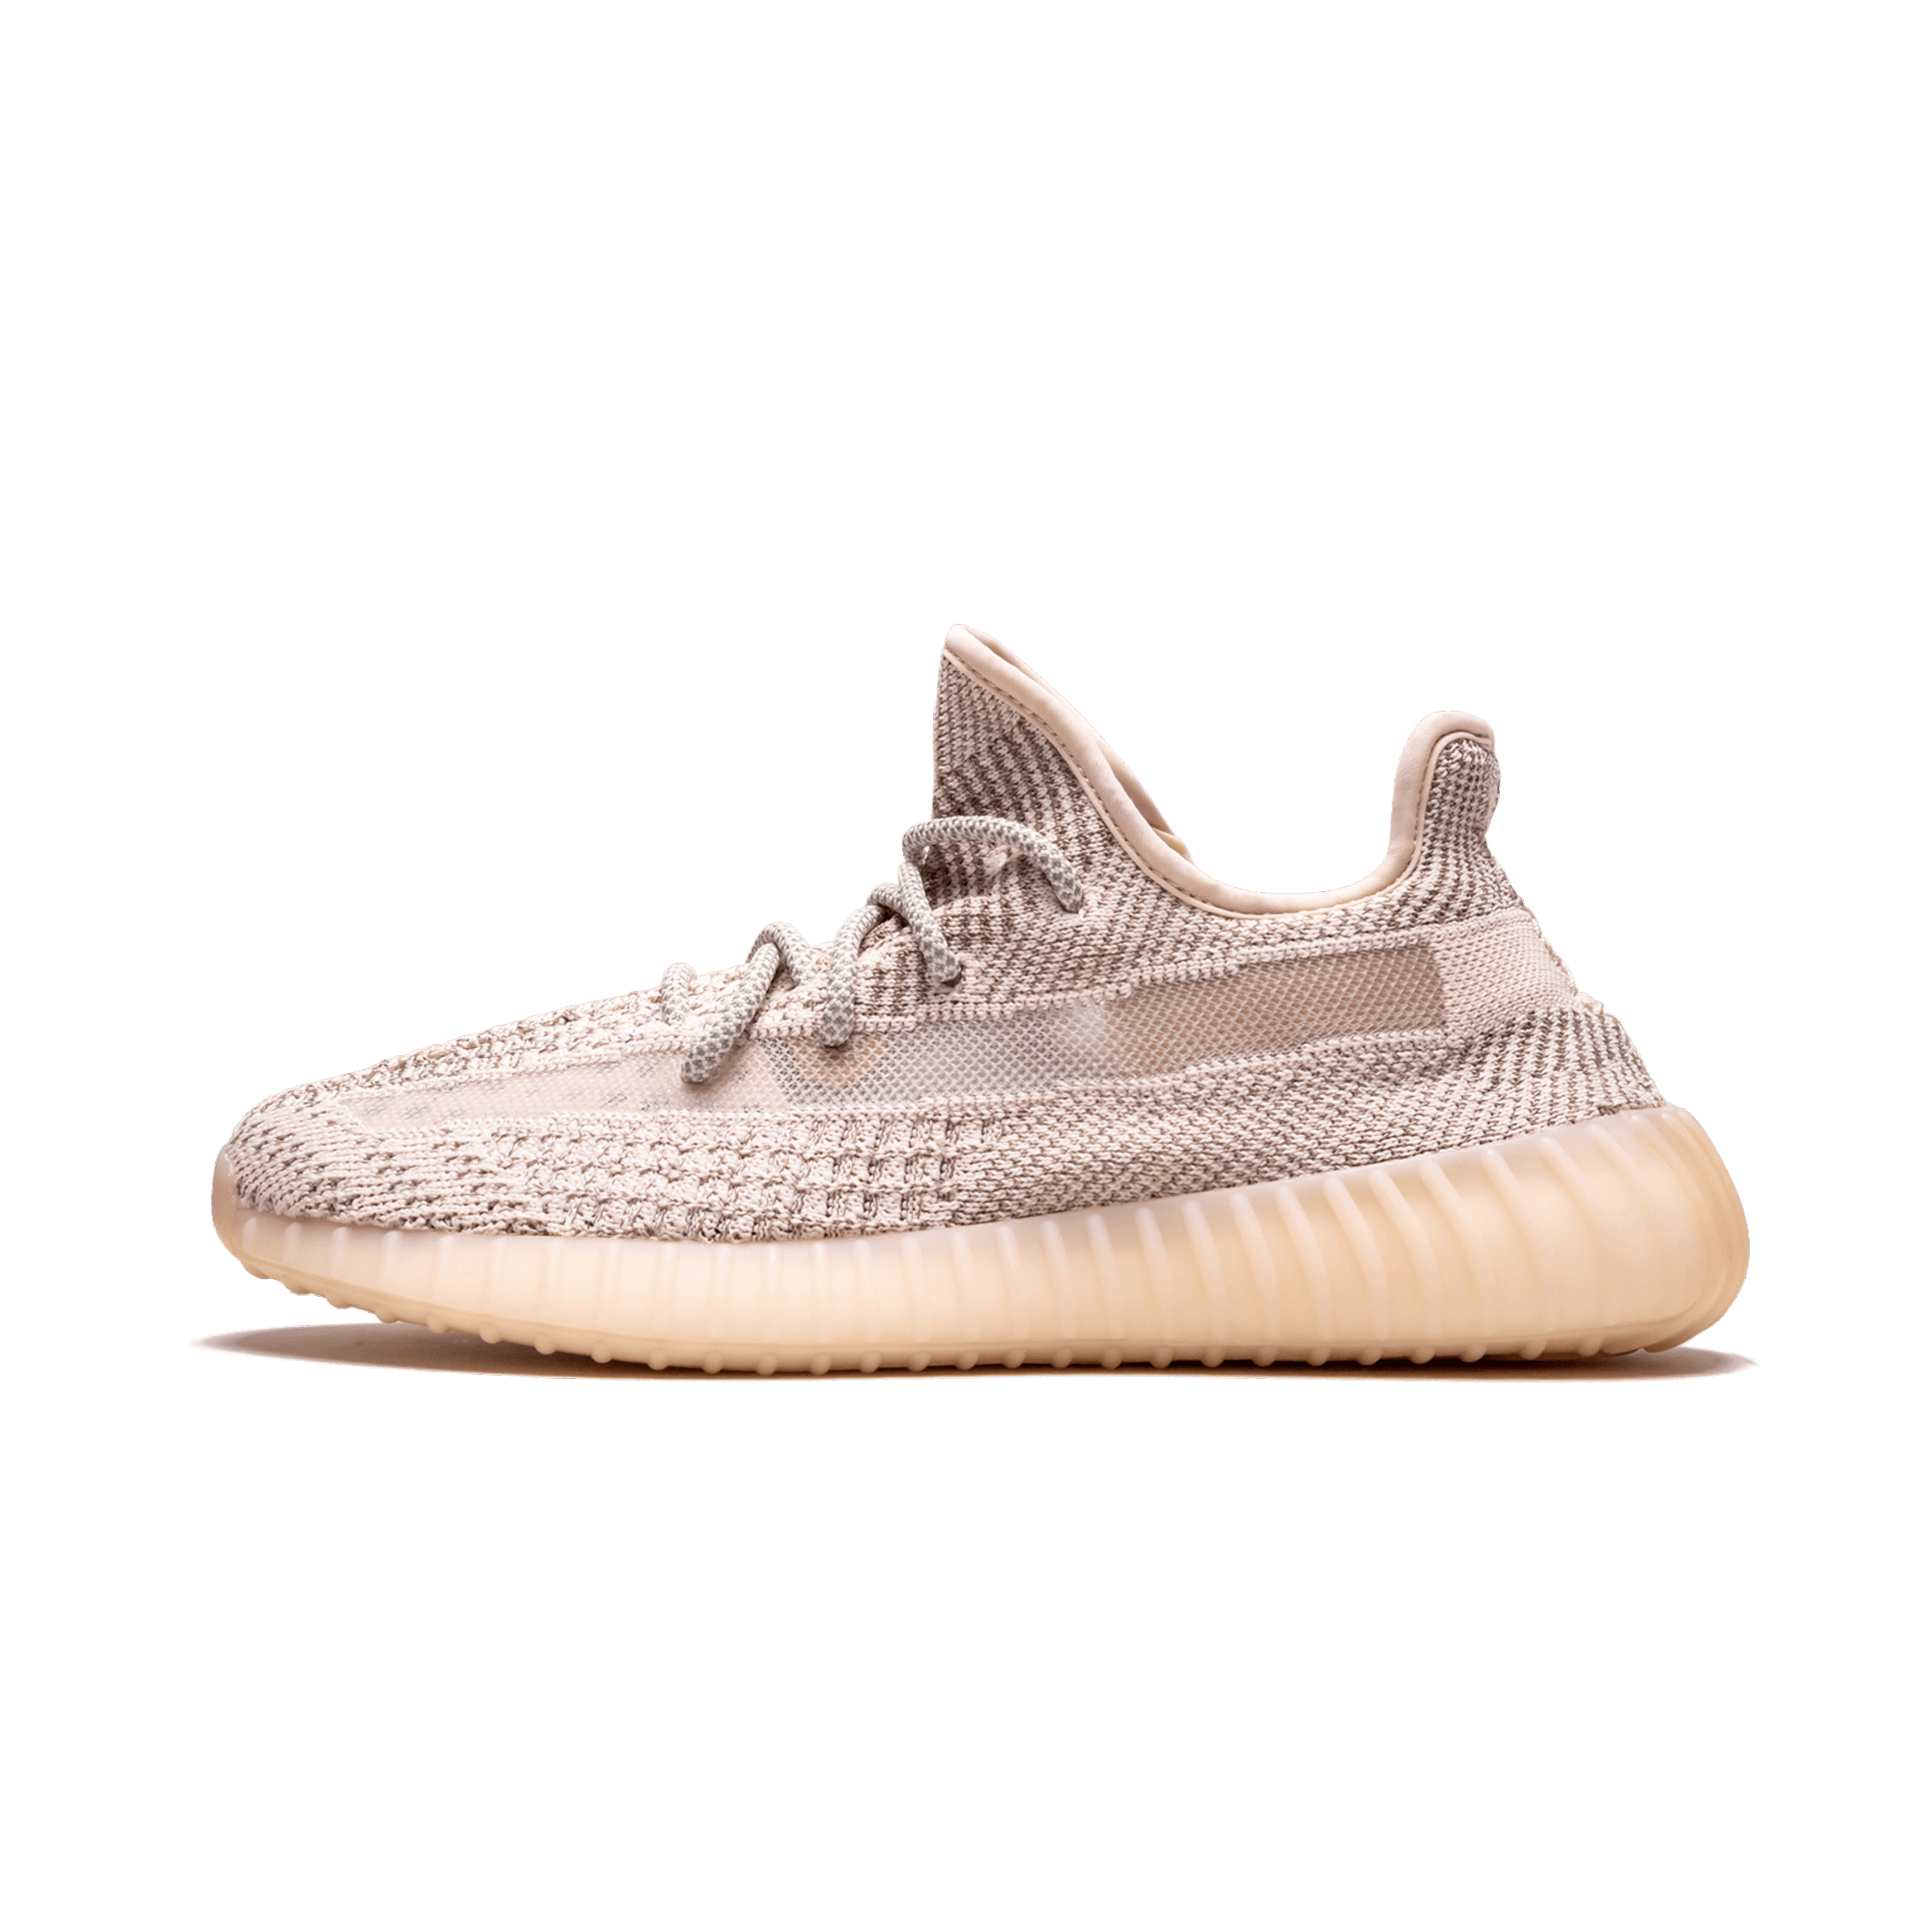 Yeezy Boost 350 V2  “Synth Non-Reflective” (4106649108552)